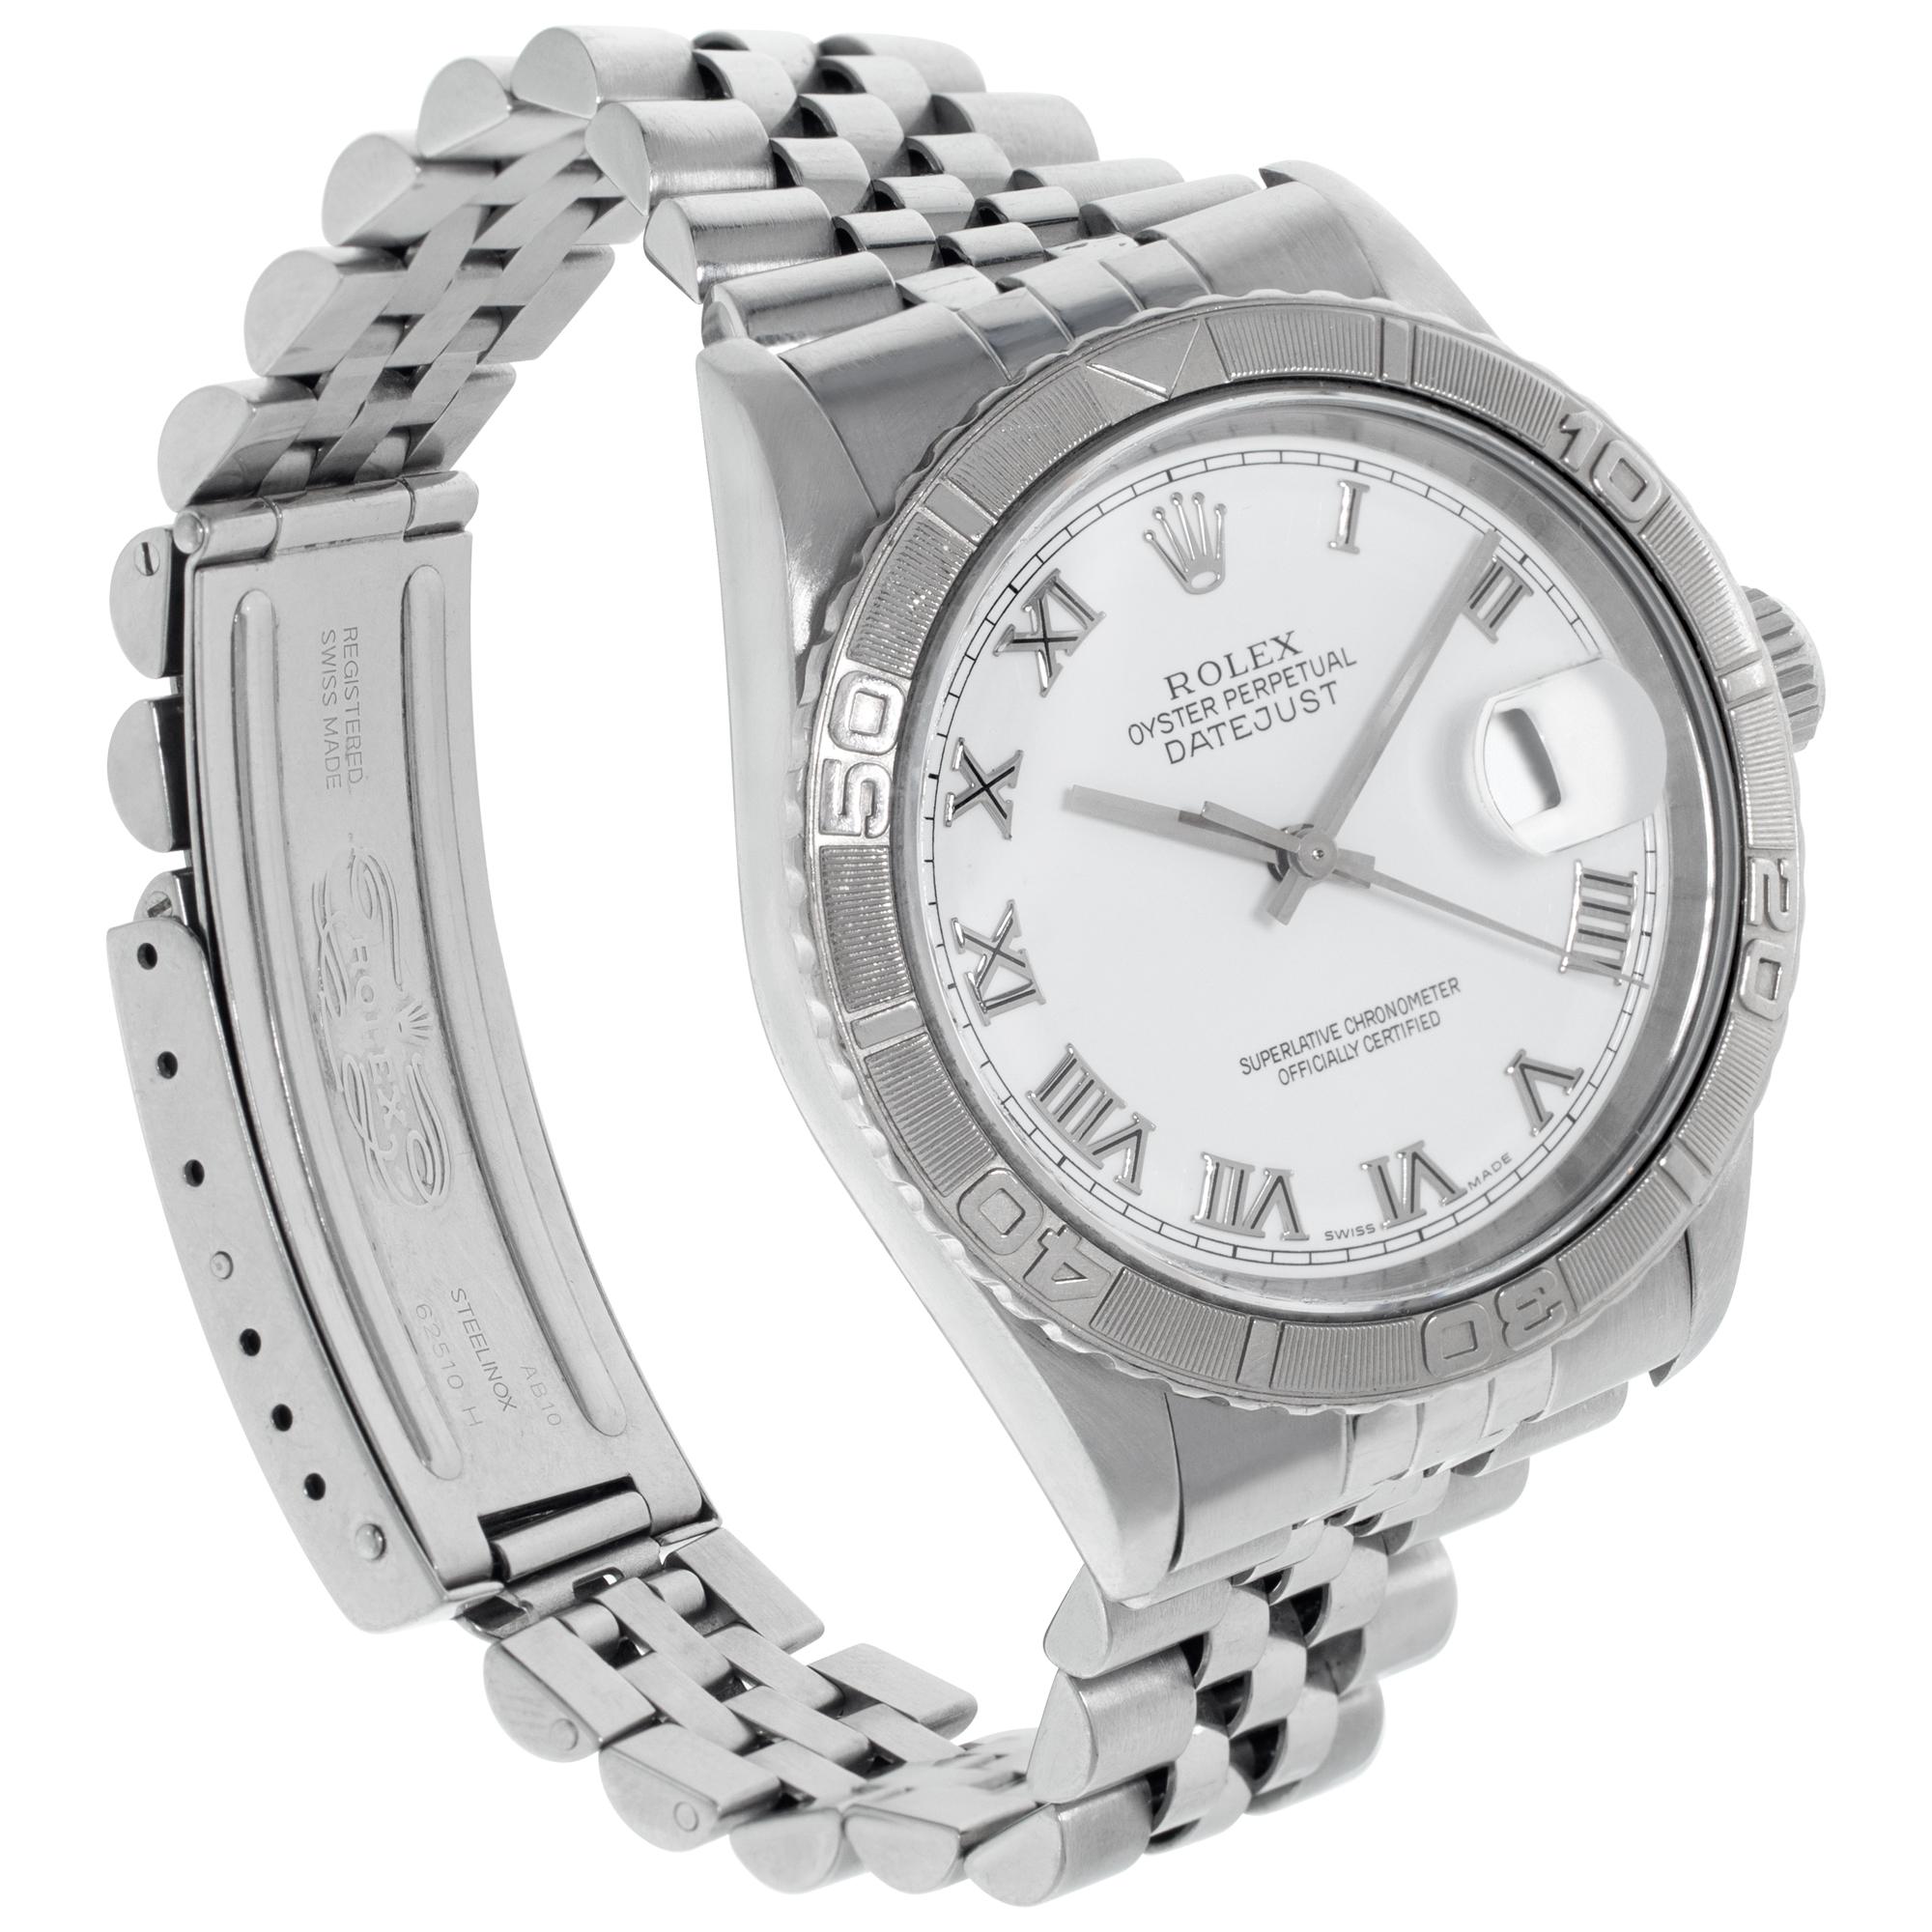 Rolex Datejust 16264 in Stainless Steel with a White dial 36mm Automatic watch In Excellent Condition For Sale In Surfside, FL